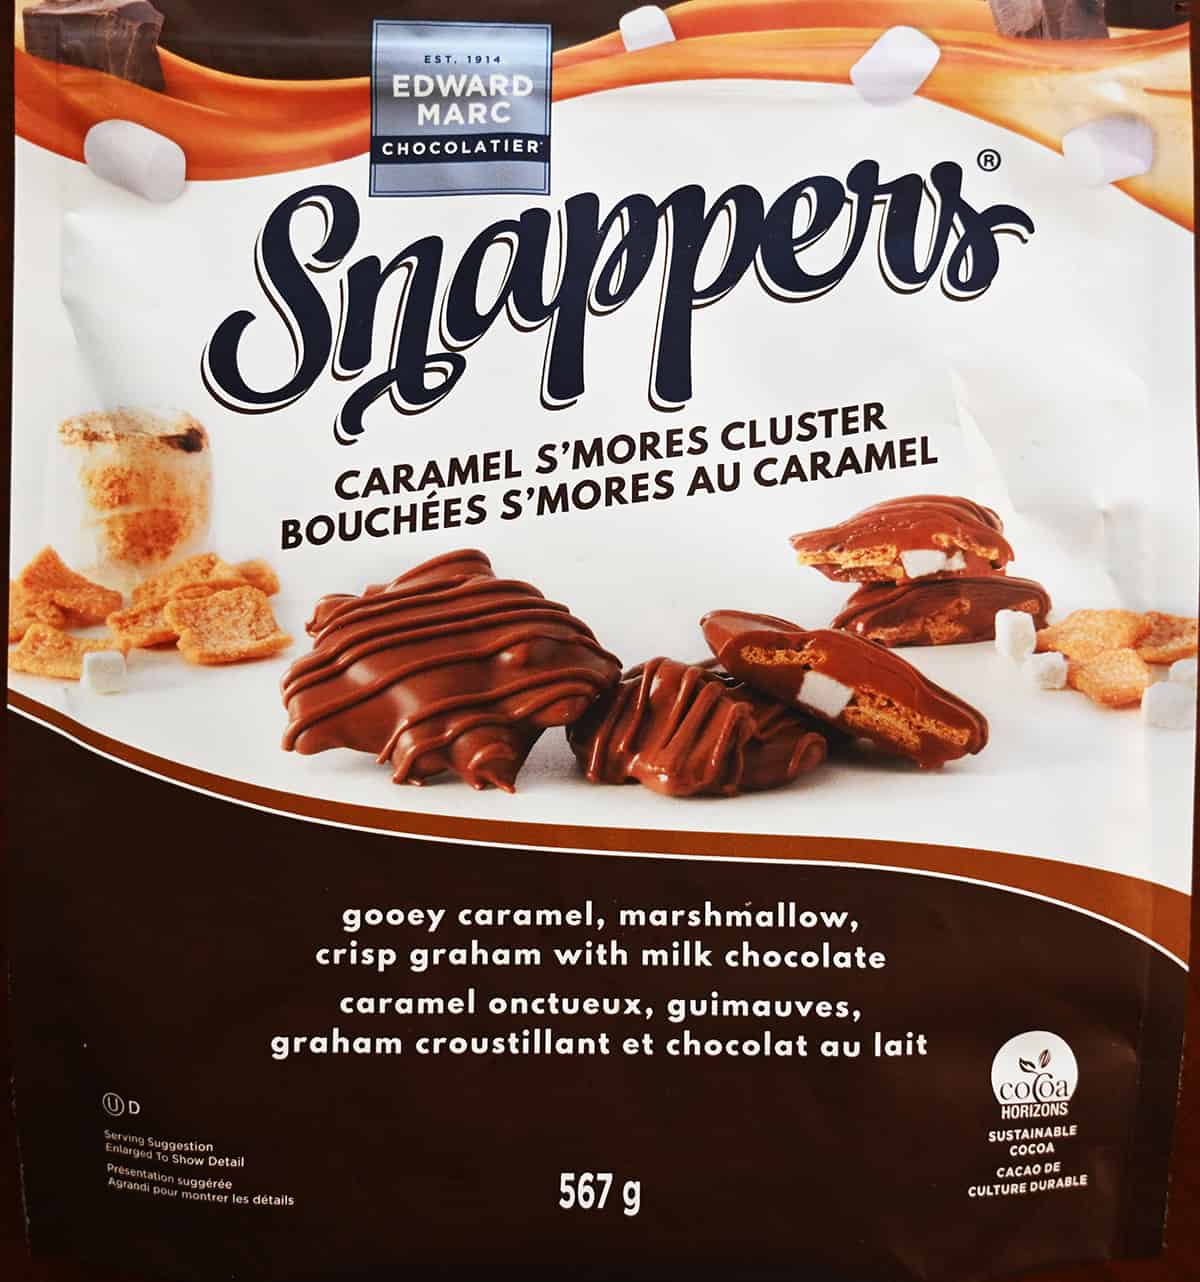 Closeup image of the front of the caramel s'mores Snappers bag.